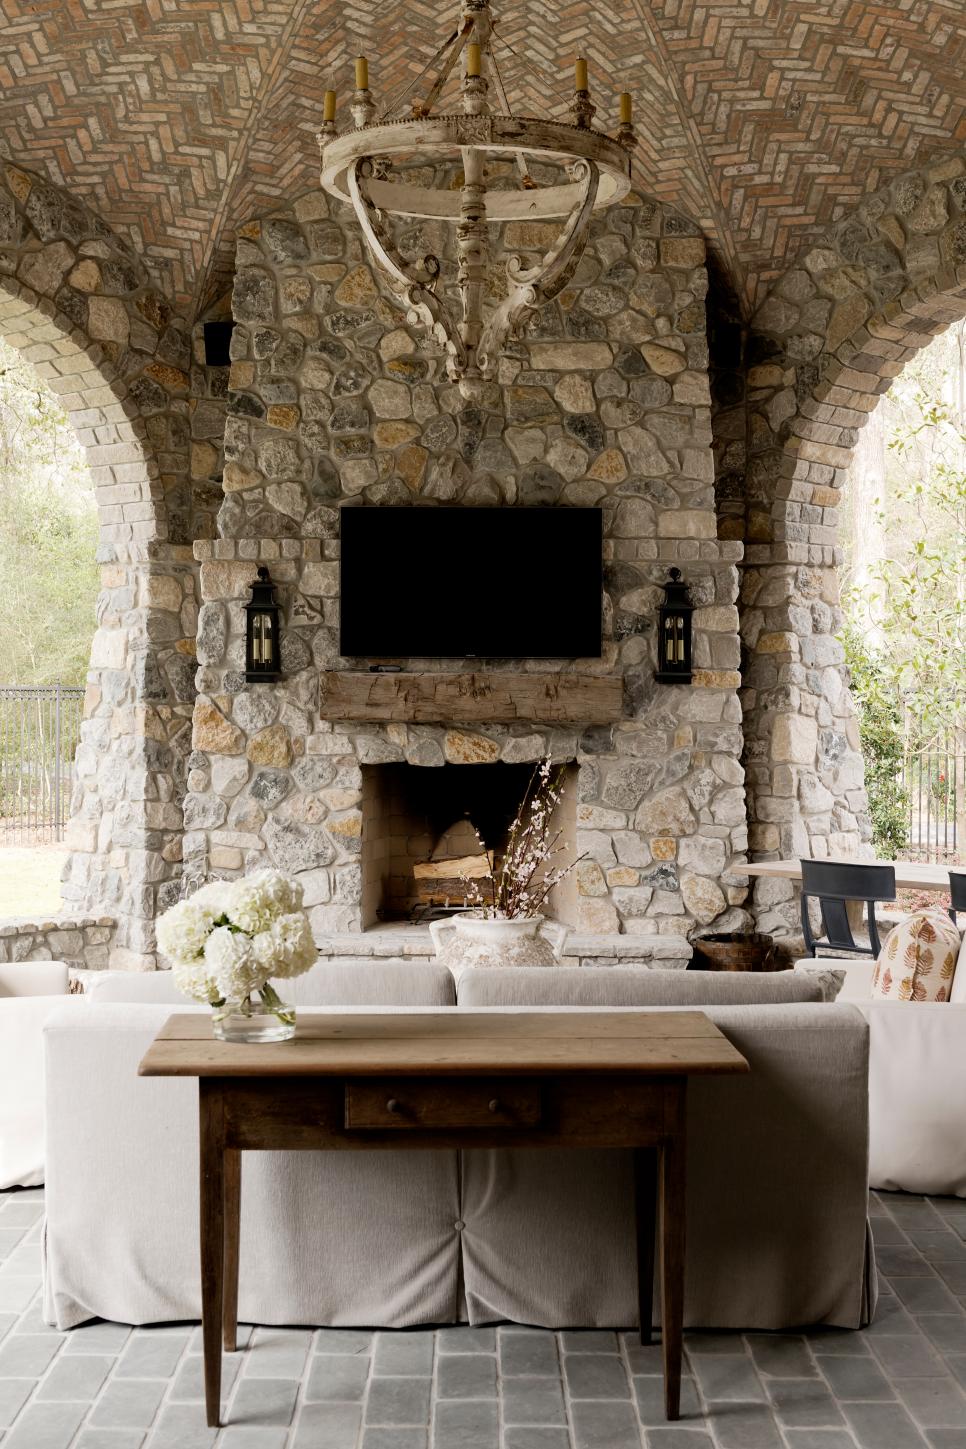 35 Amazing Outdoor Fireplaces and Fire Pits | DIY